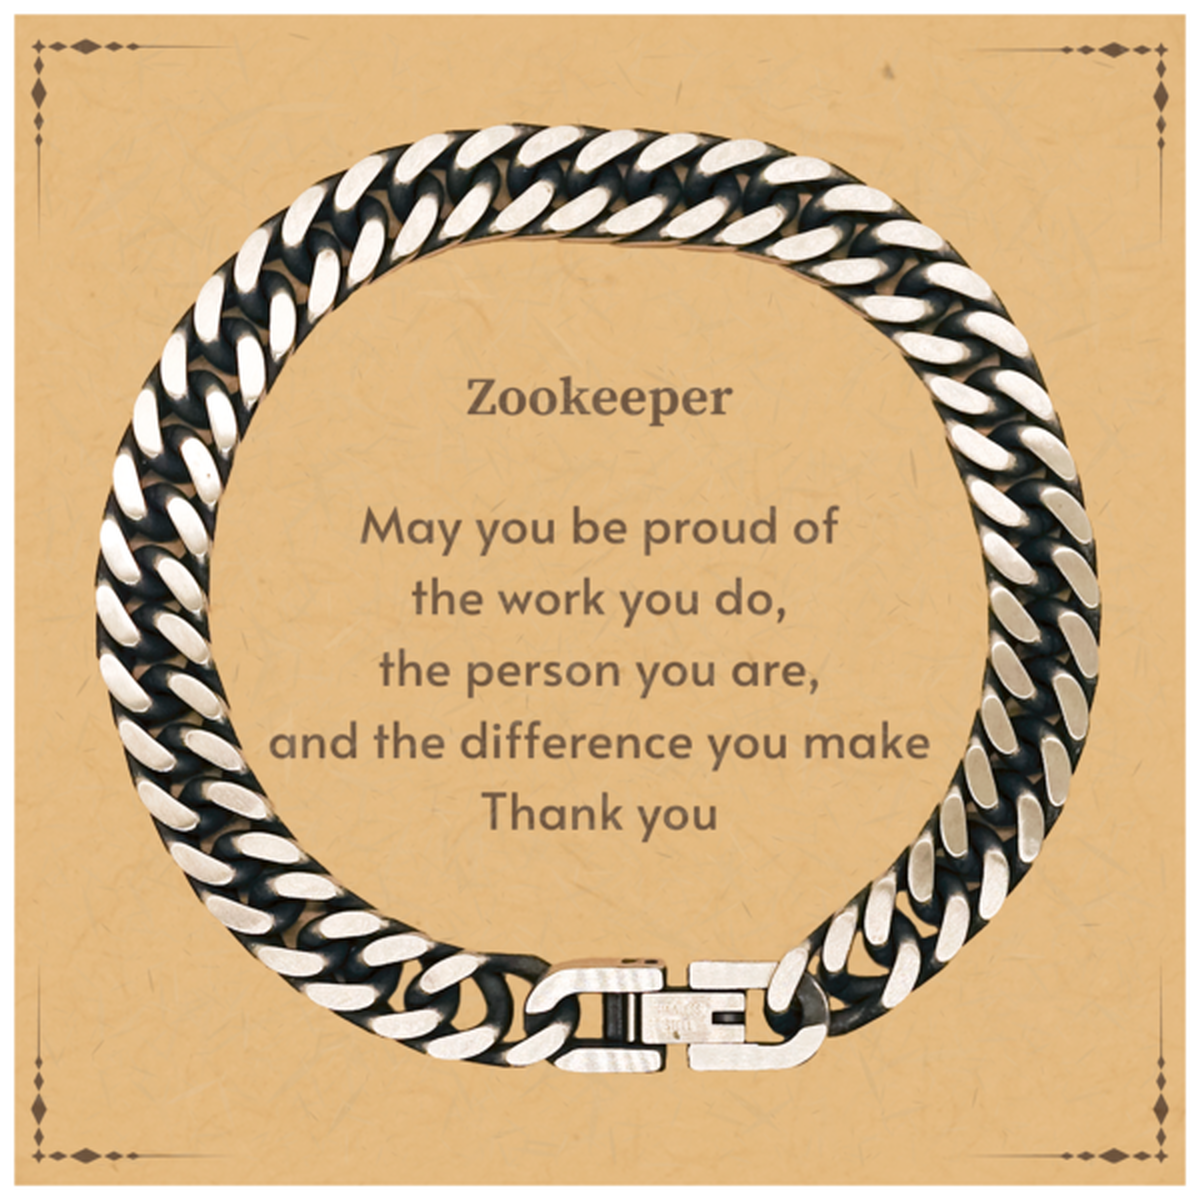 Heartwarming Cuban Link Chain Bracelet Retirement Coworkers Gifts for Zookeeper, Zookeeper May You be proud of the work you do, the person you are Gifts for Boss Men Women Friends